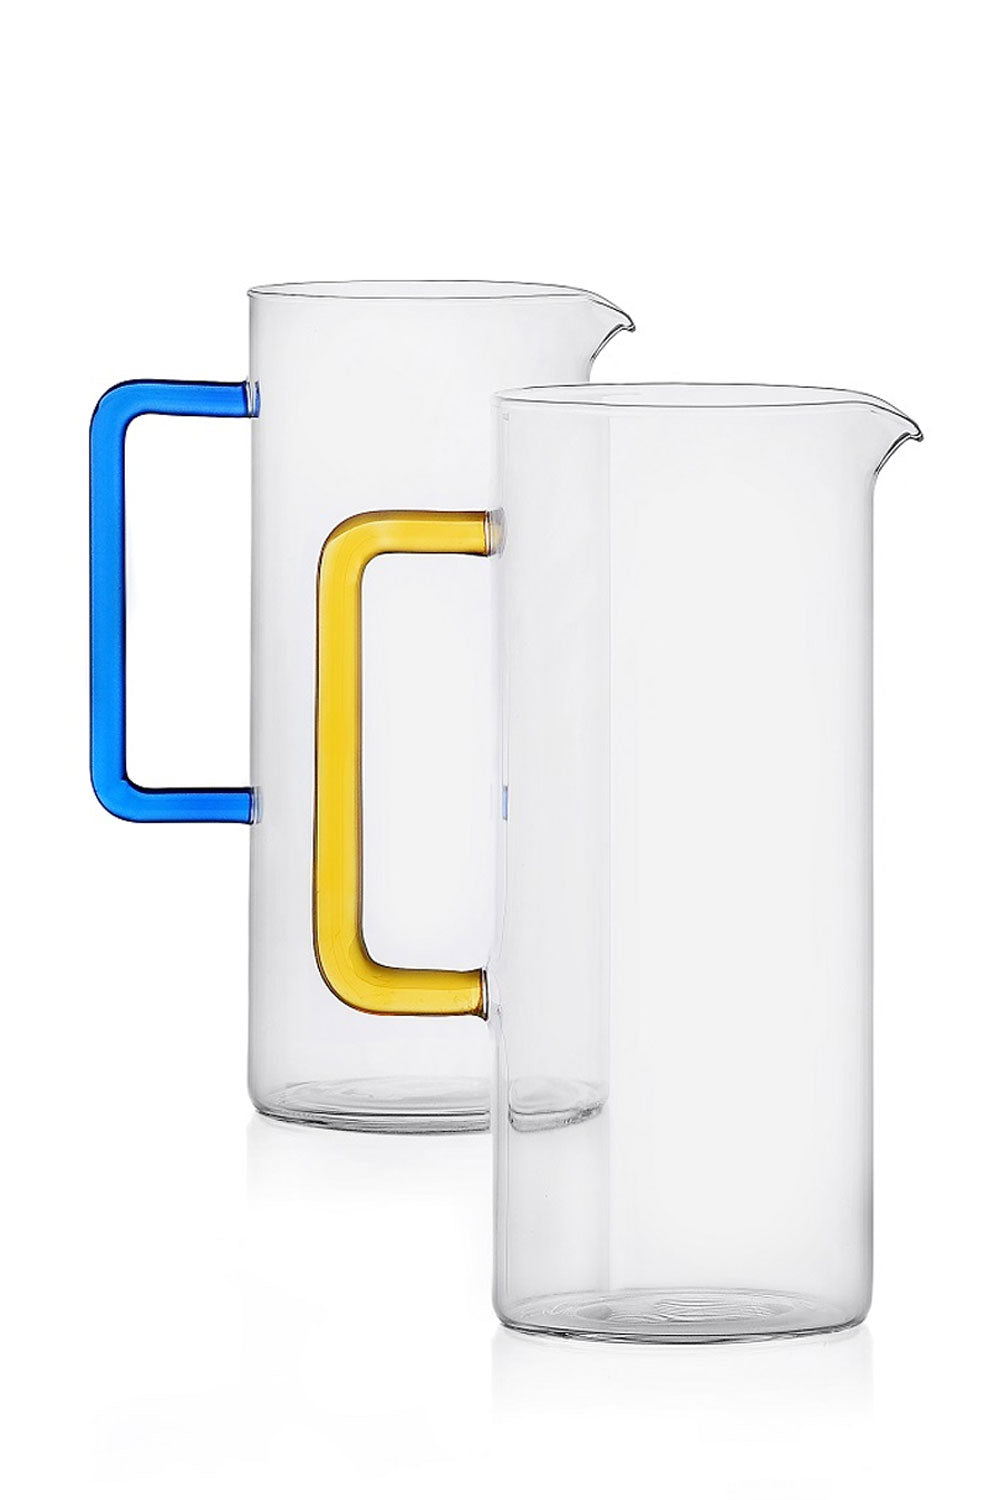 Tube Jug with Blue Handle, 1.2 L